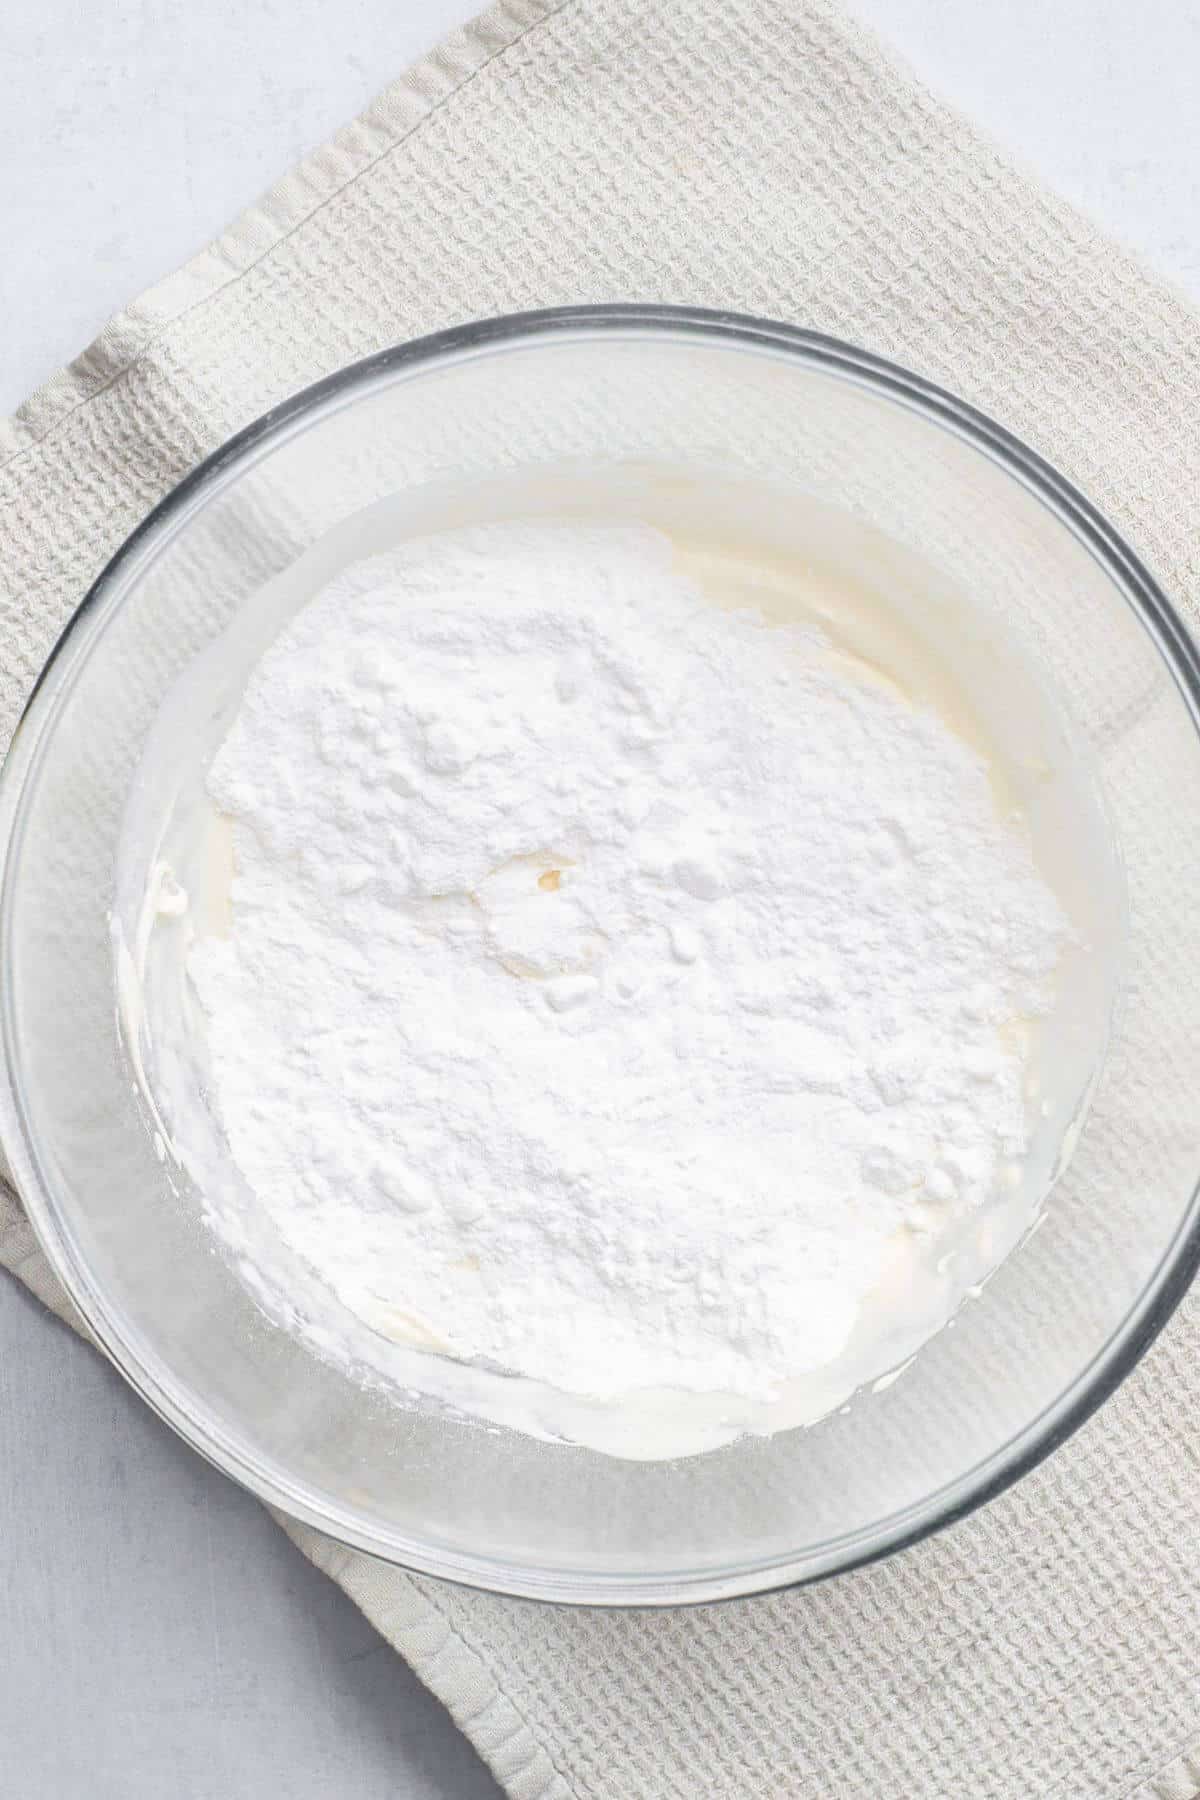 Sugar added to whipped cream in mixing bowl.